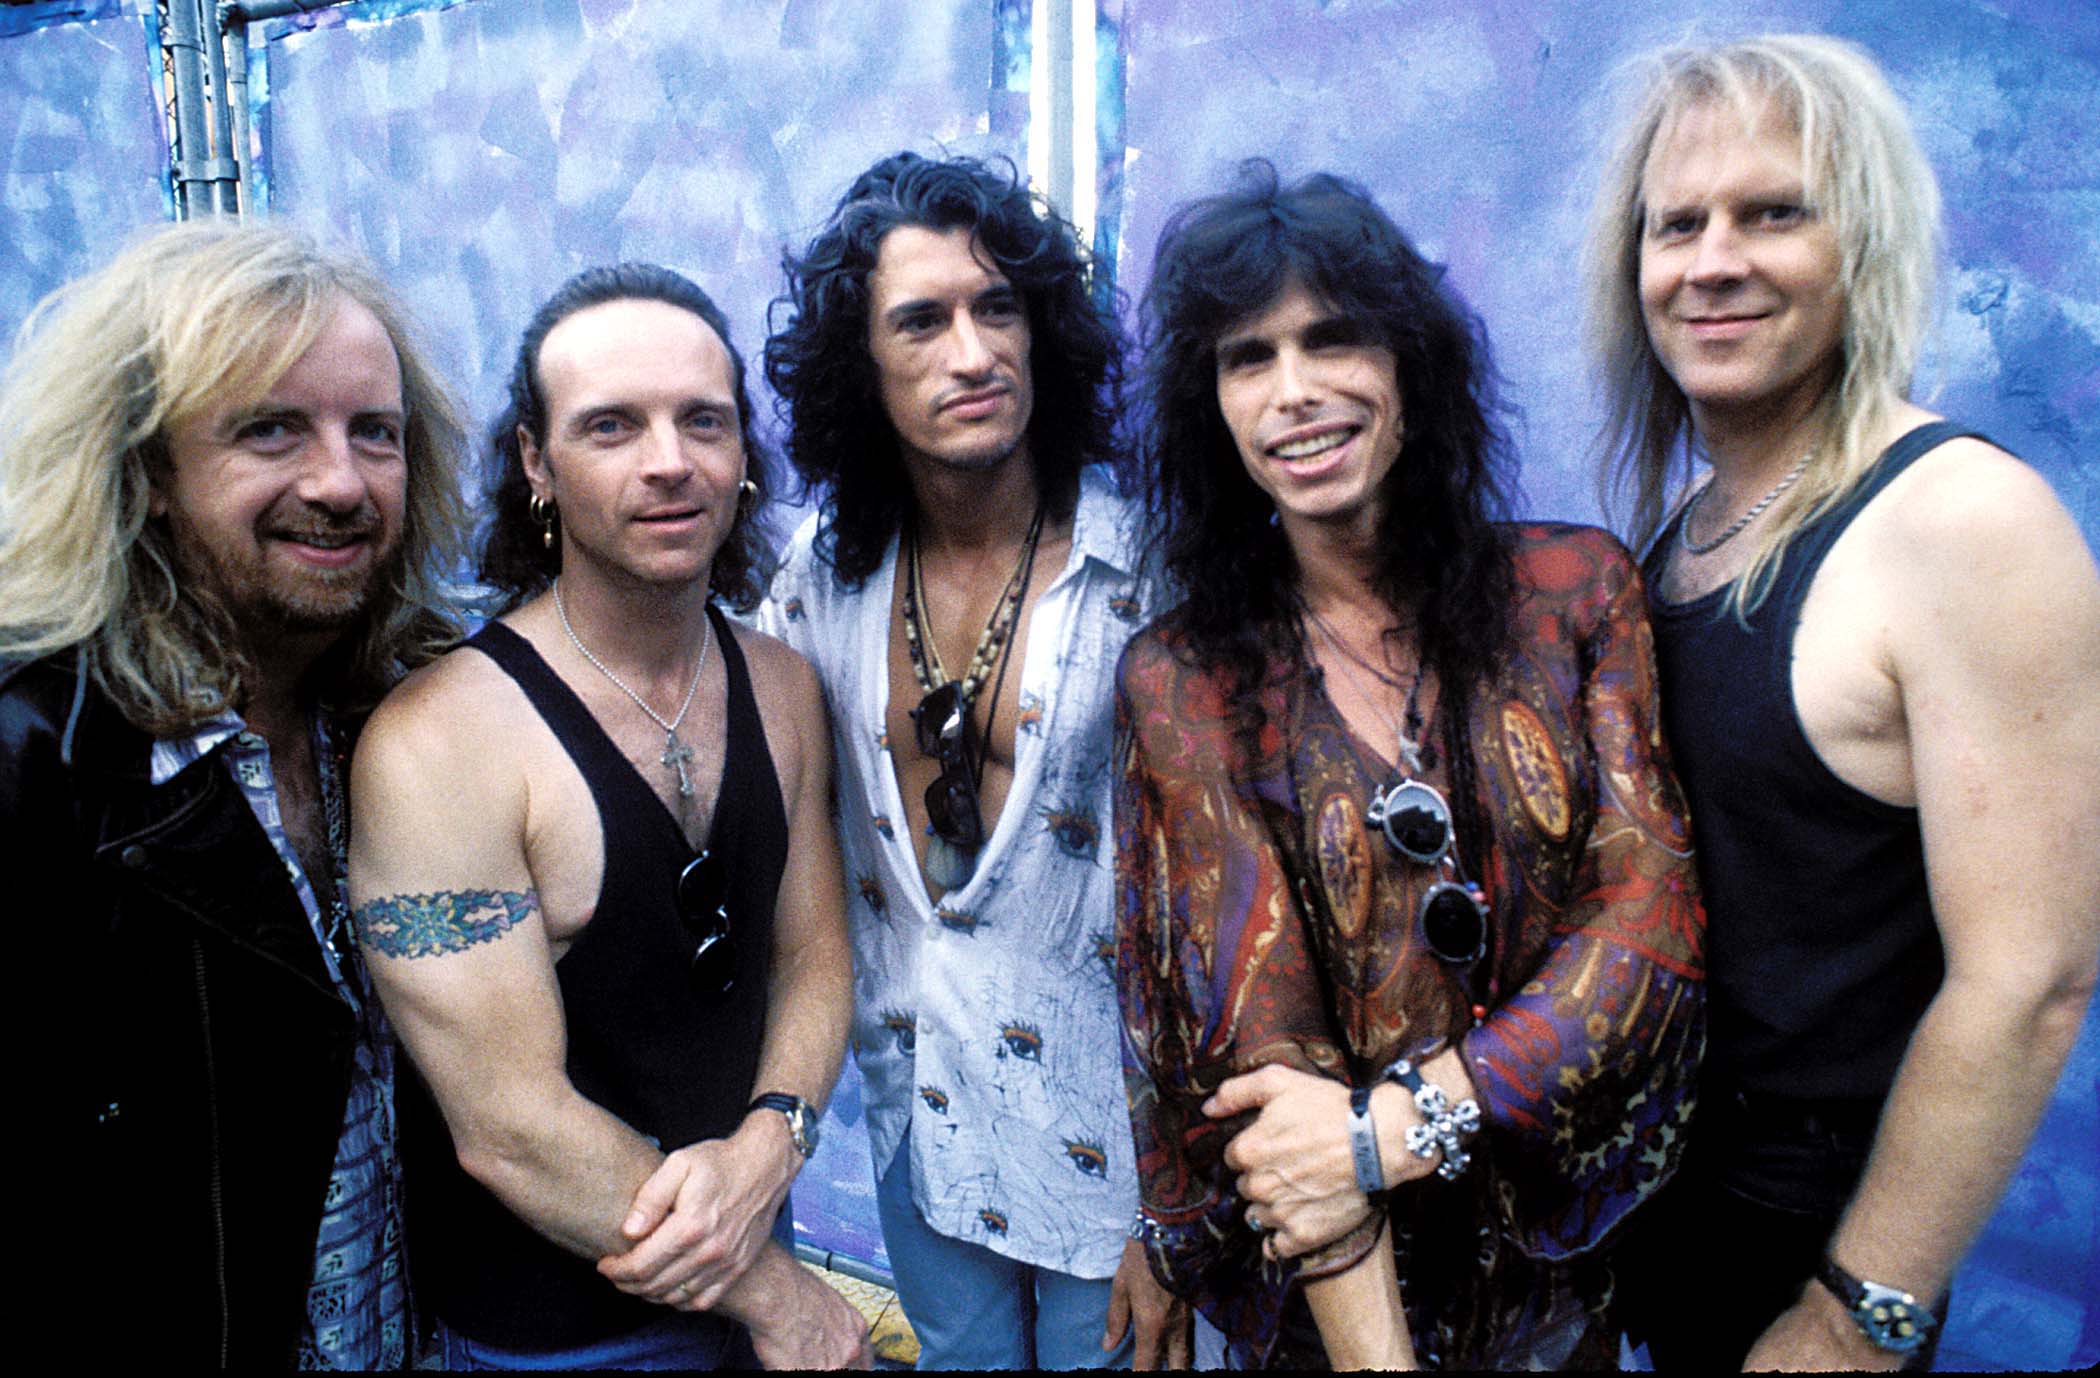 Steven Tyler and other members of Aerosmith with a blue background